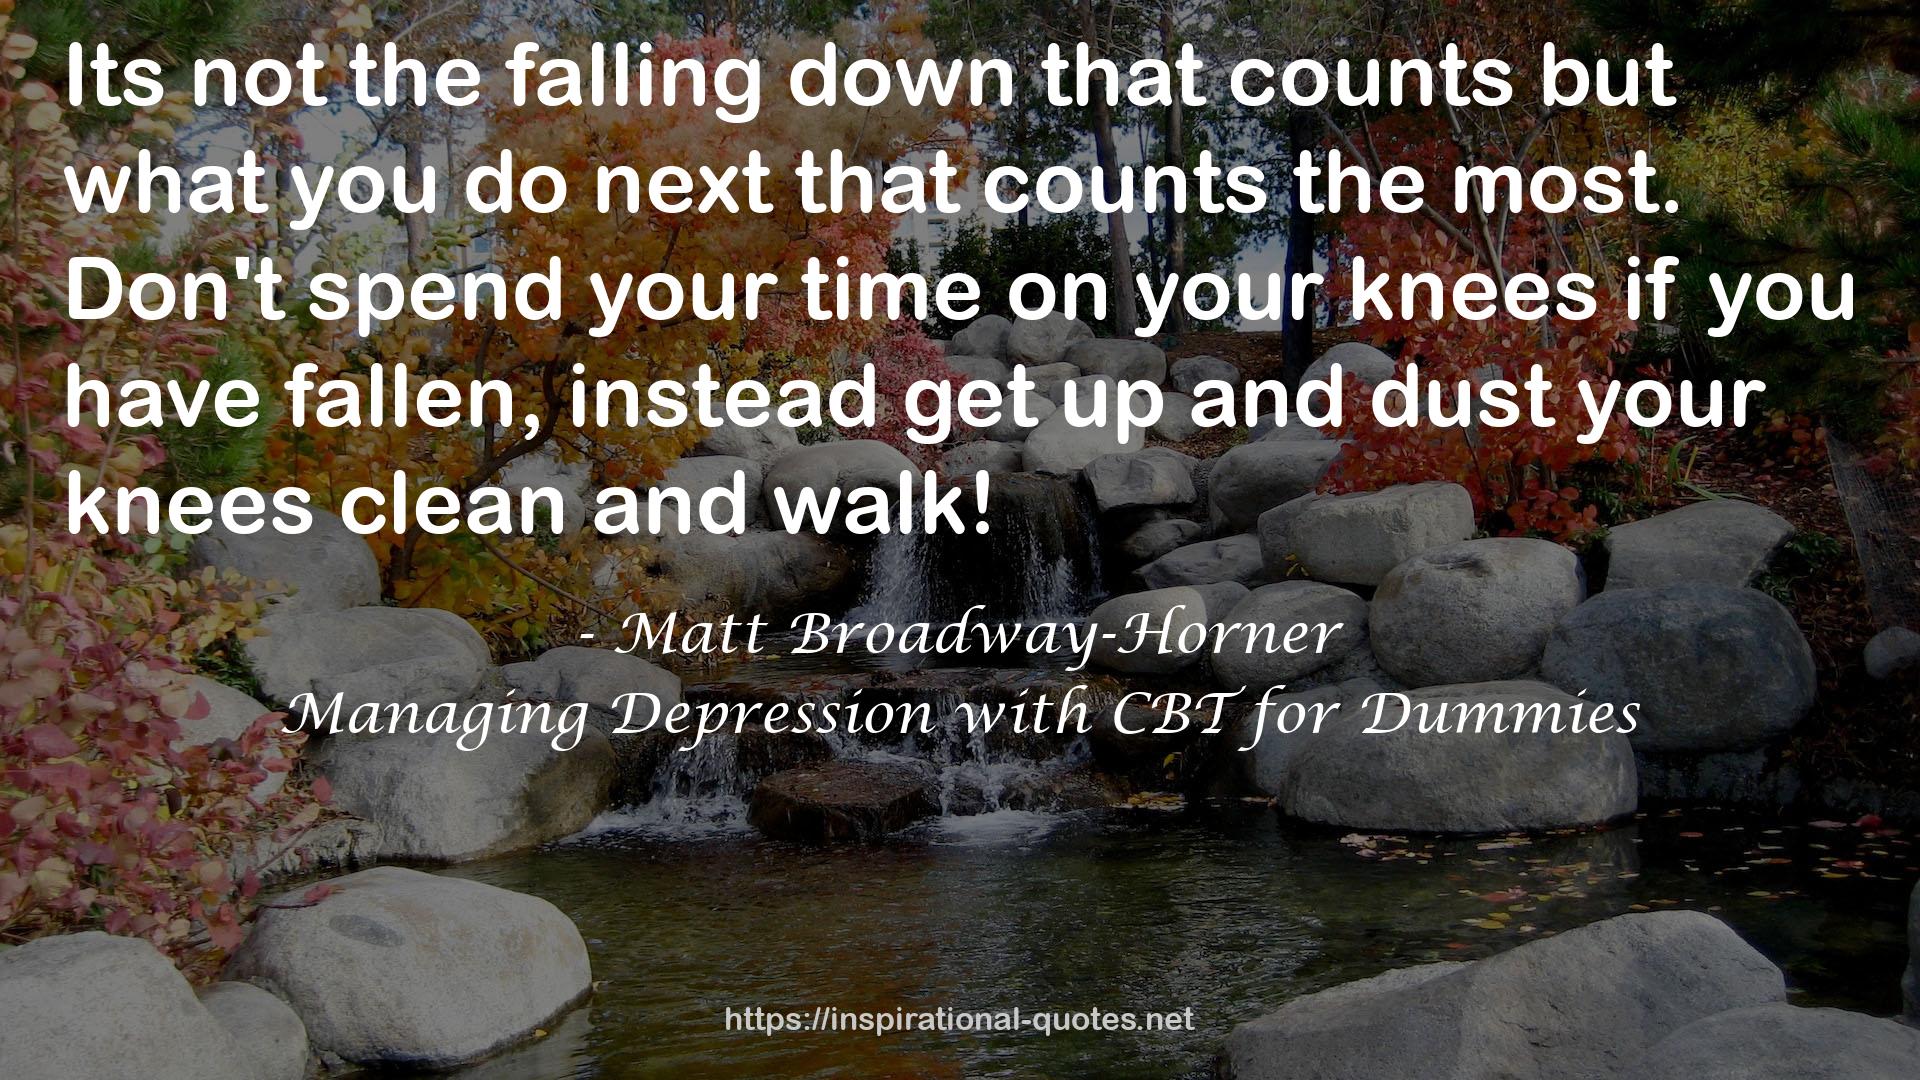 Managing Depression with CBT for Dummies QUOTES